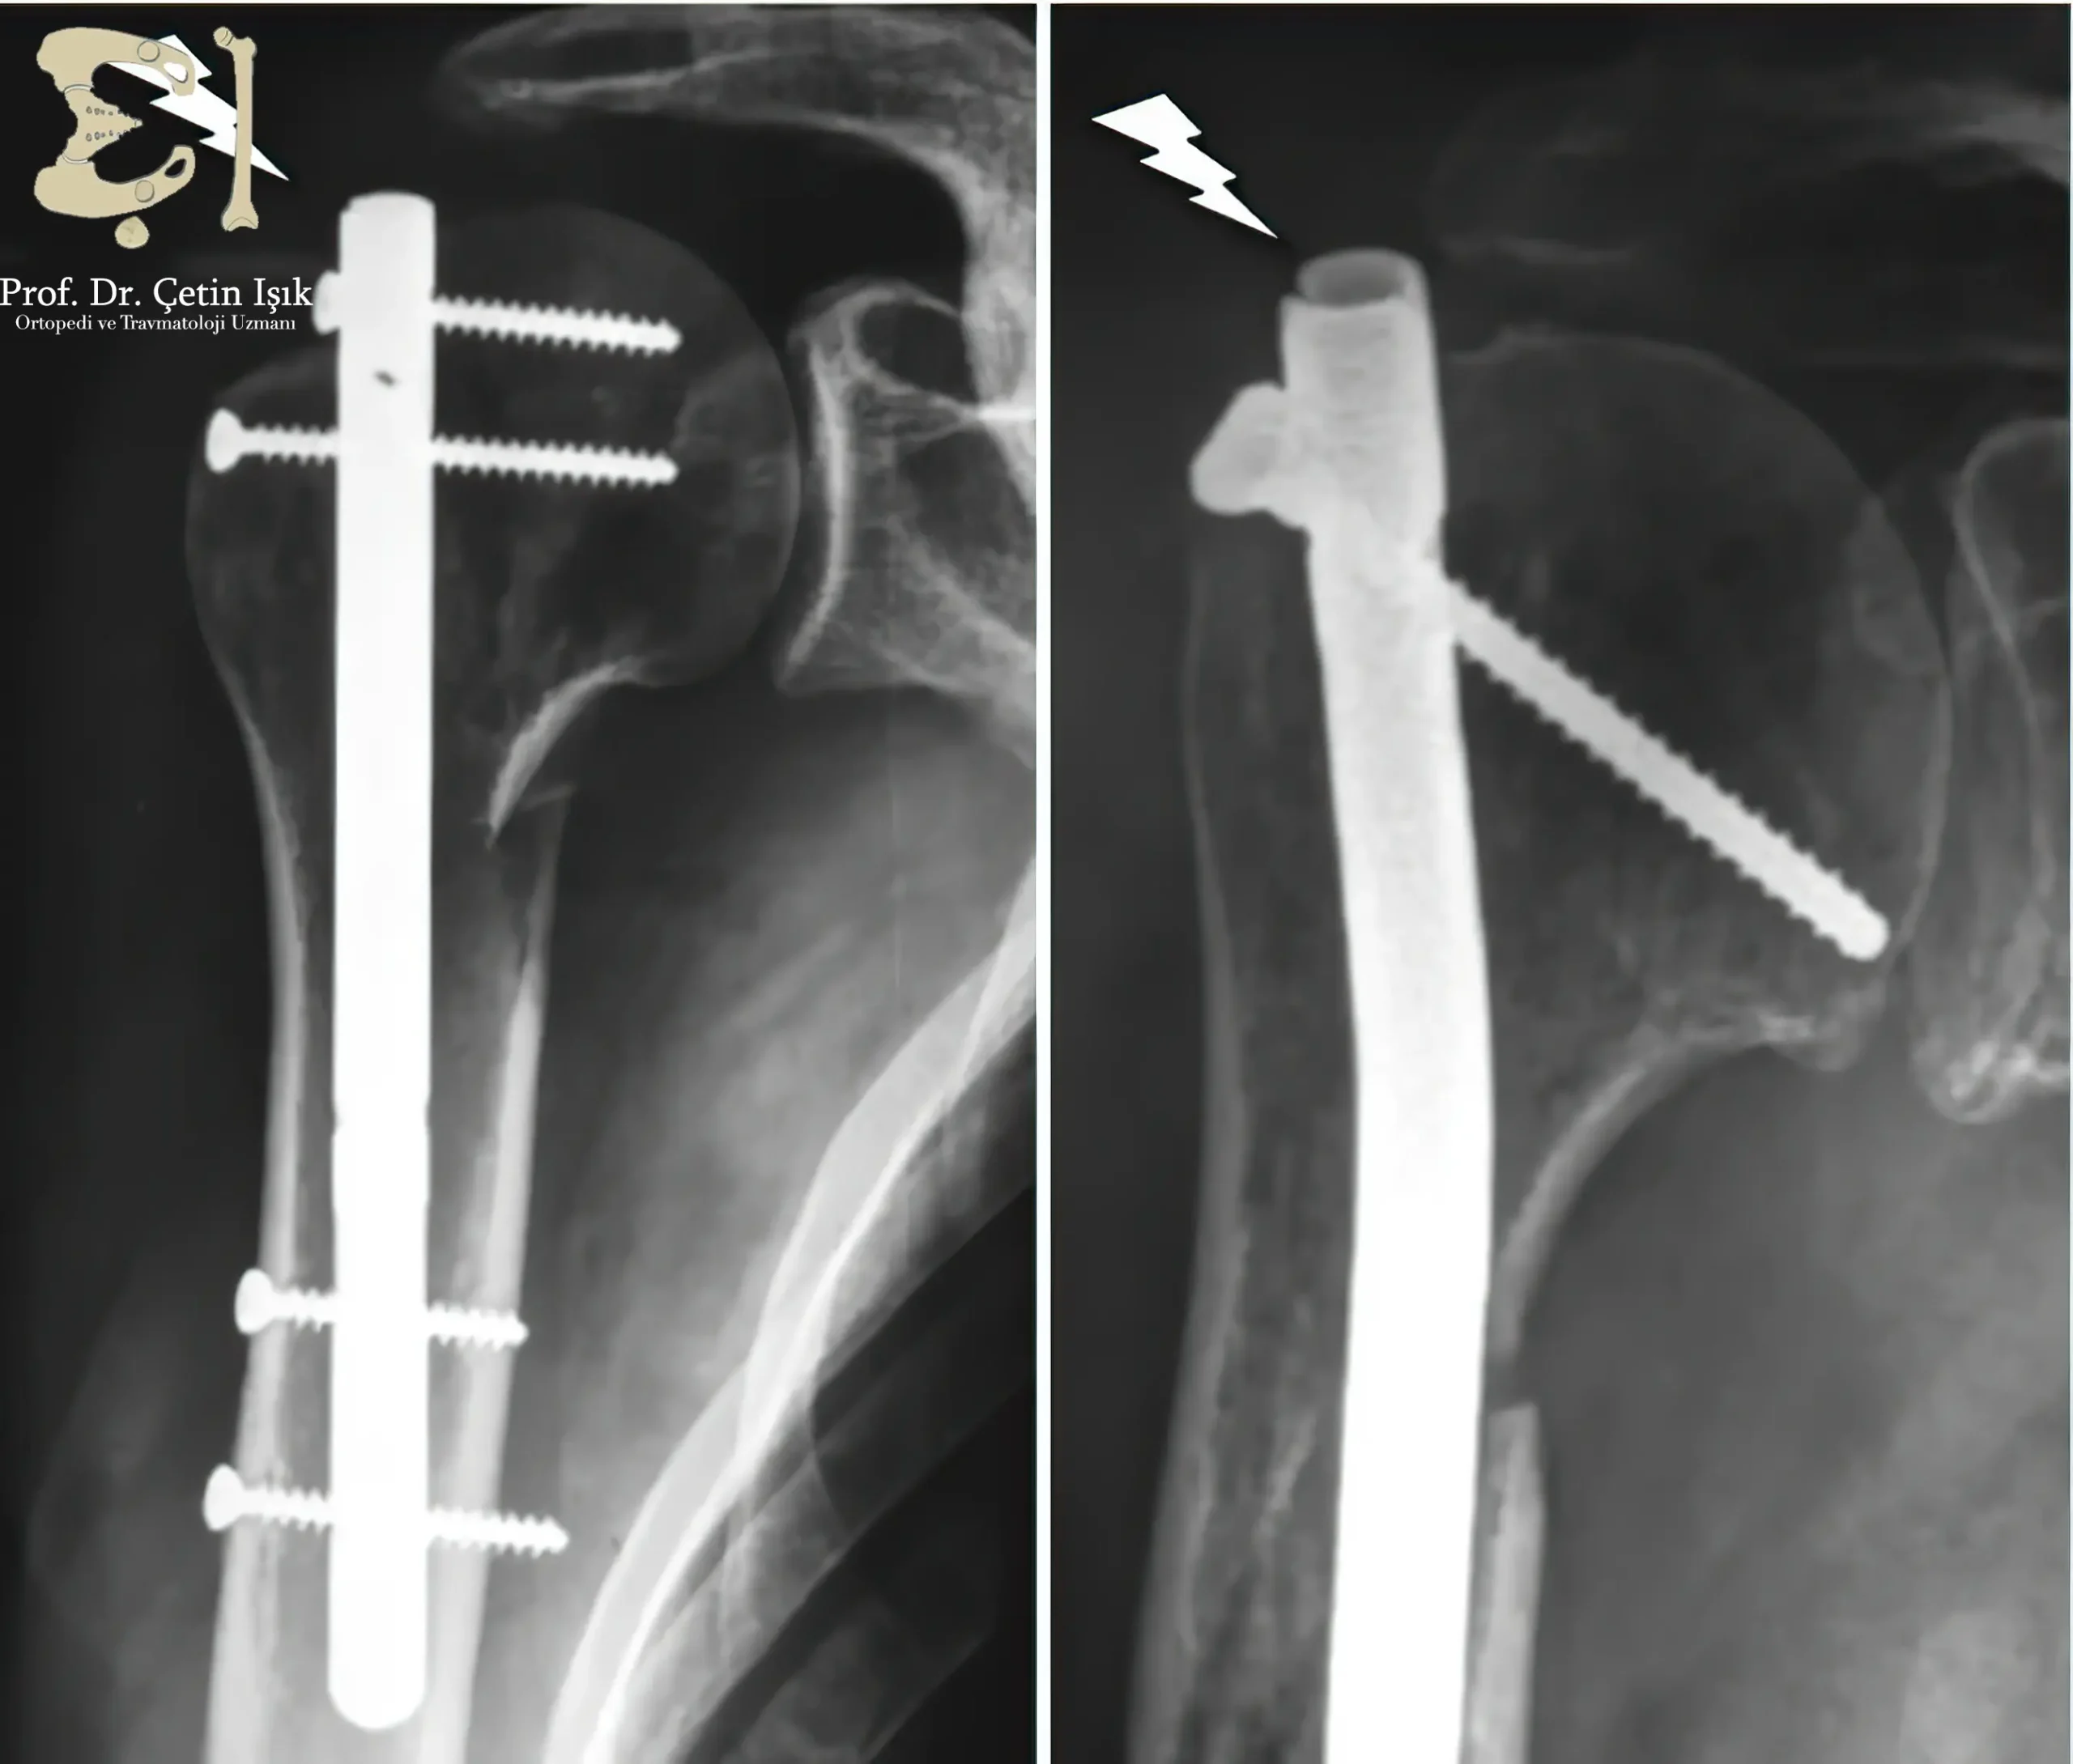 Image showing internal fixation to treat a humerus fracture using a metal skewer fixed with two screws from the top and bottom